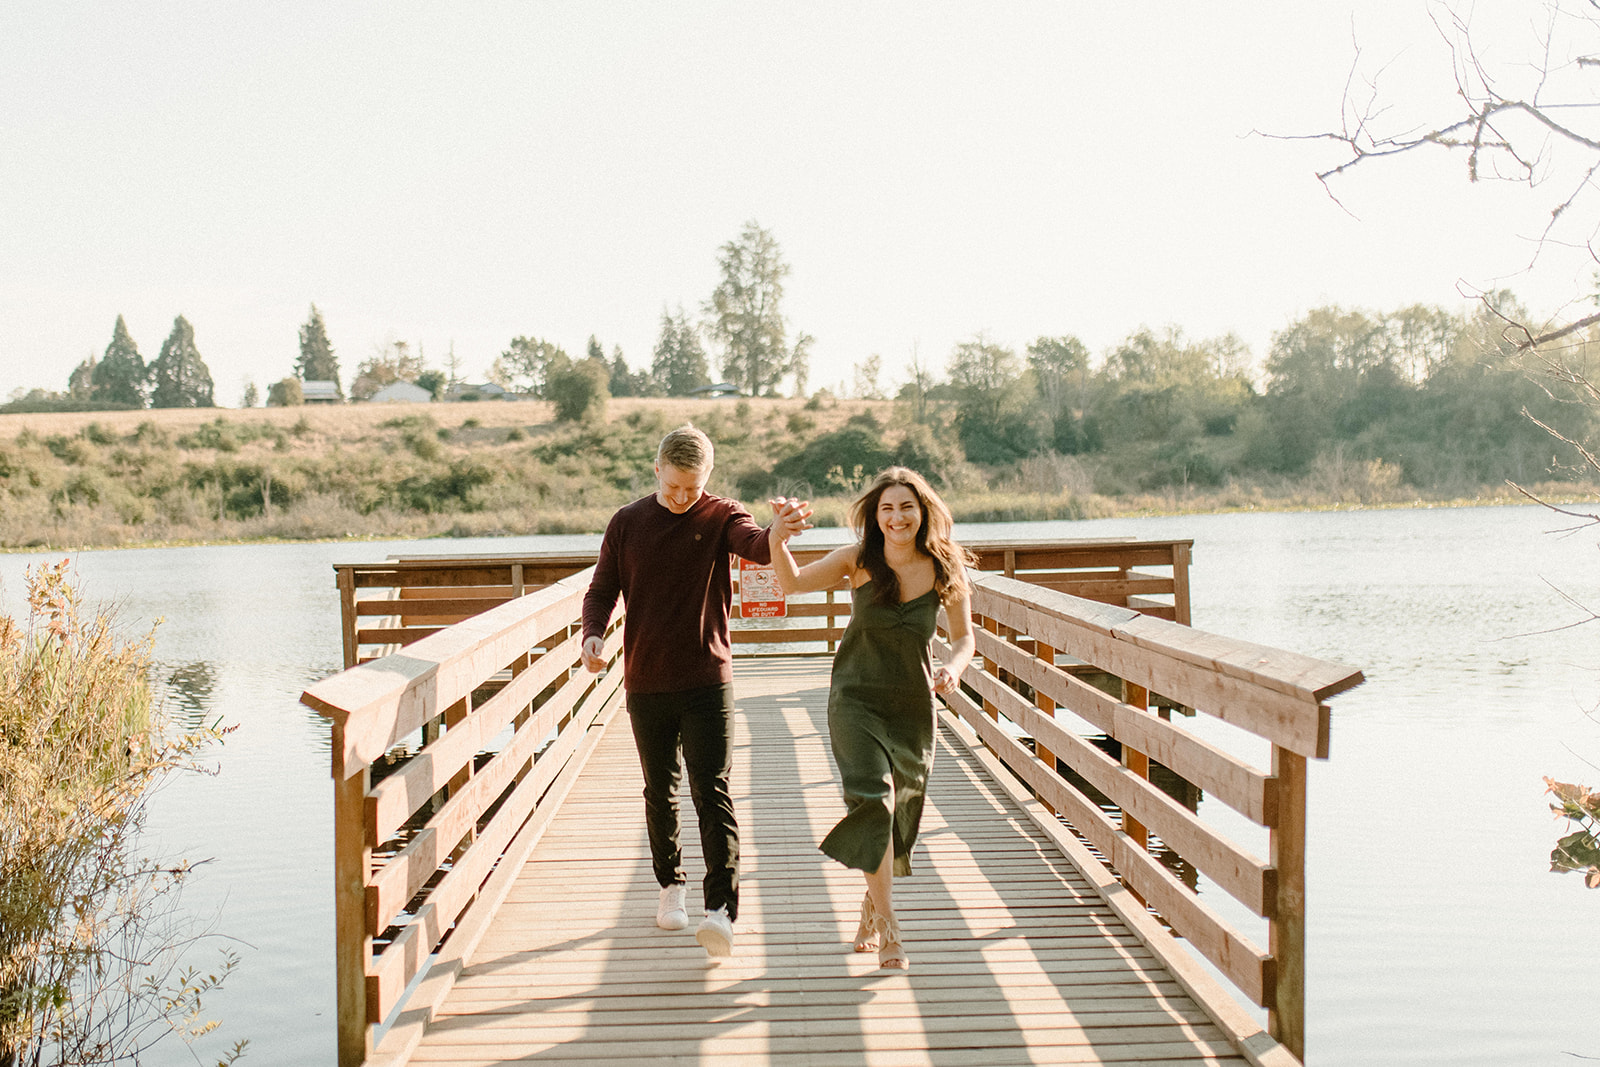 Fun outdoor engagement session taken by Washington Engagement Photographer